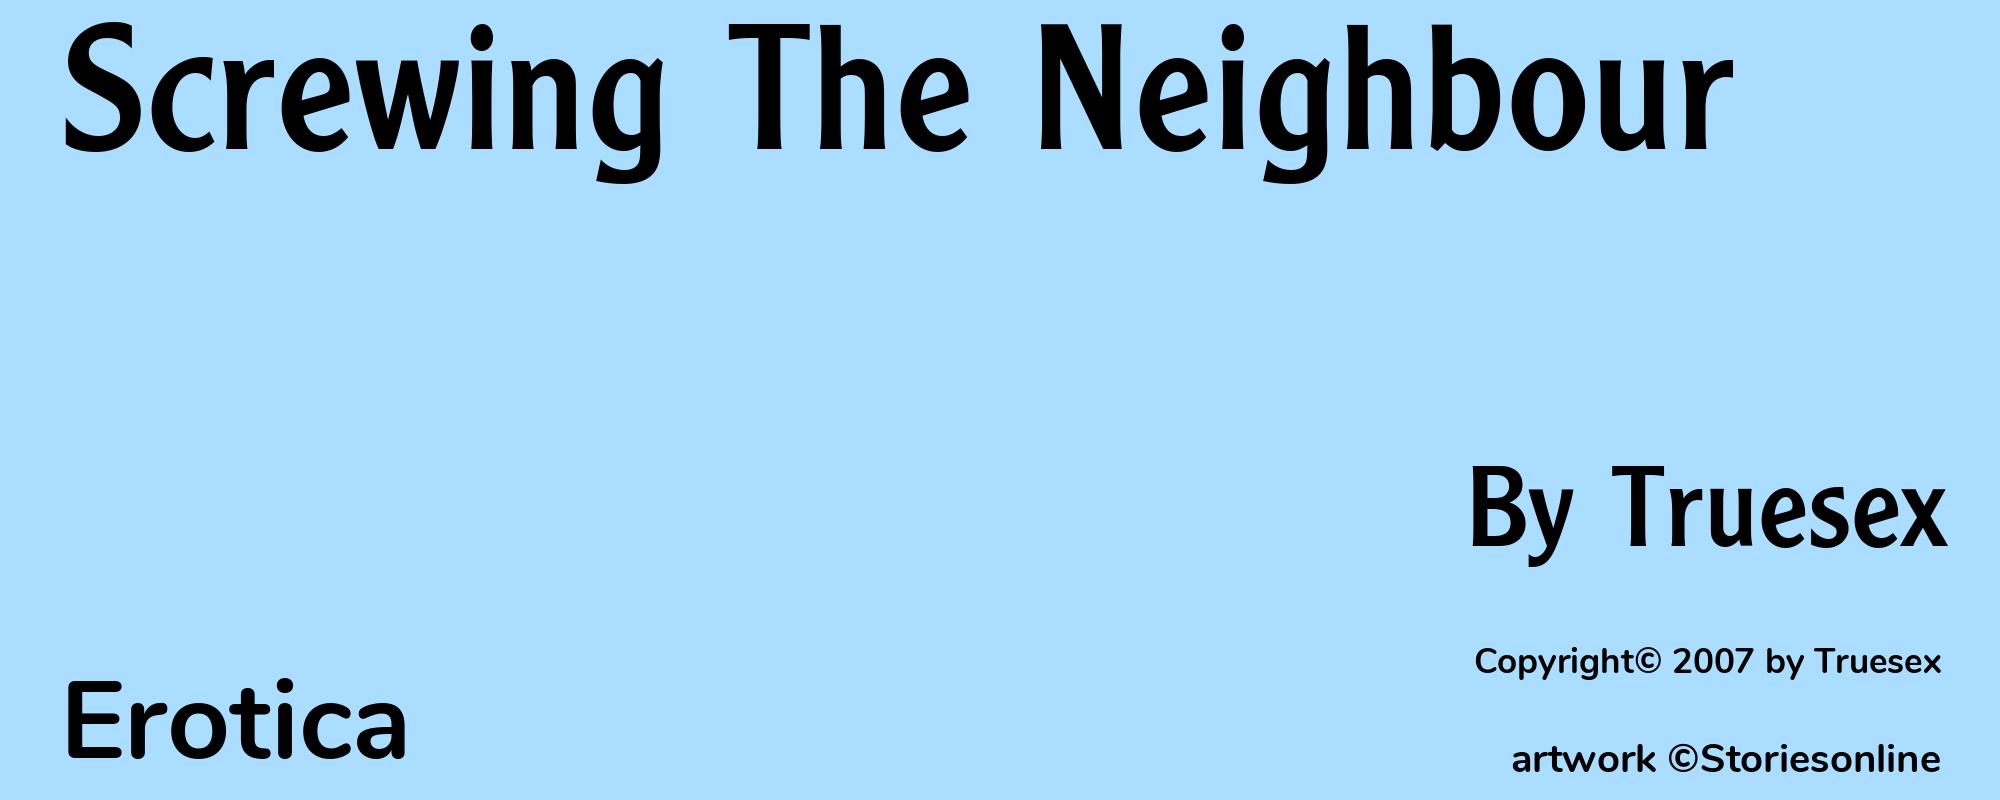 Screwing The Neighbour - Cover